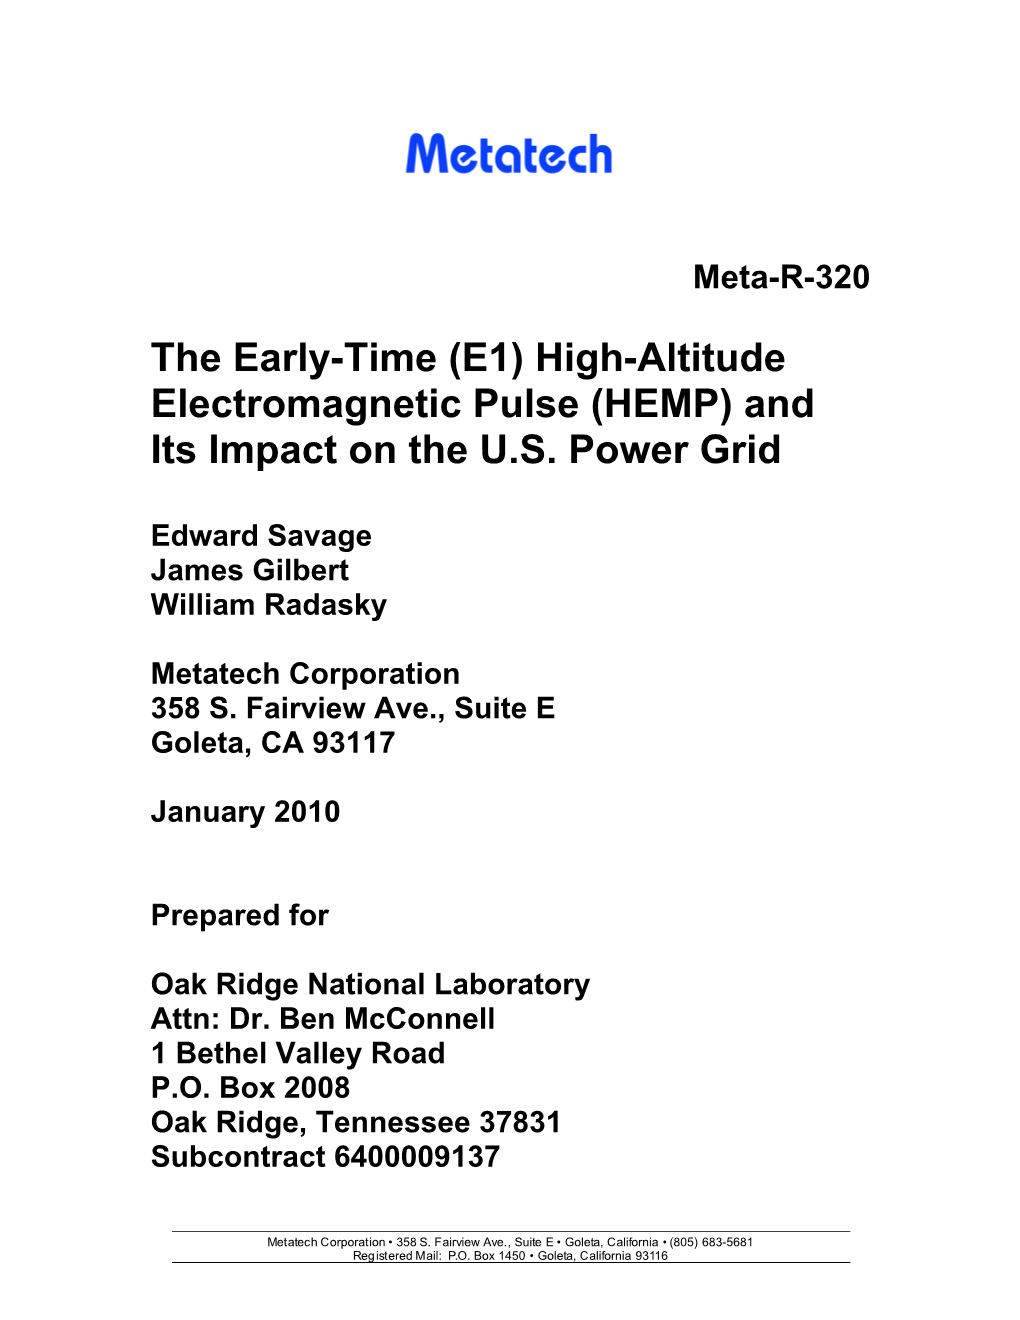 The Early-Time (E1) High-Altitude Electromagnetic Pulse (HEMP) and Its Impact on the U.S